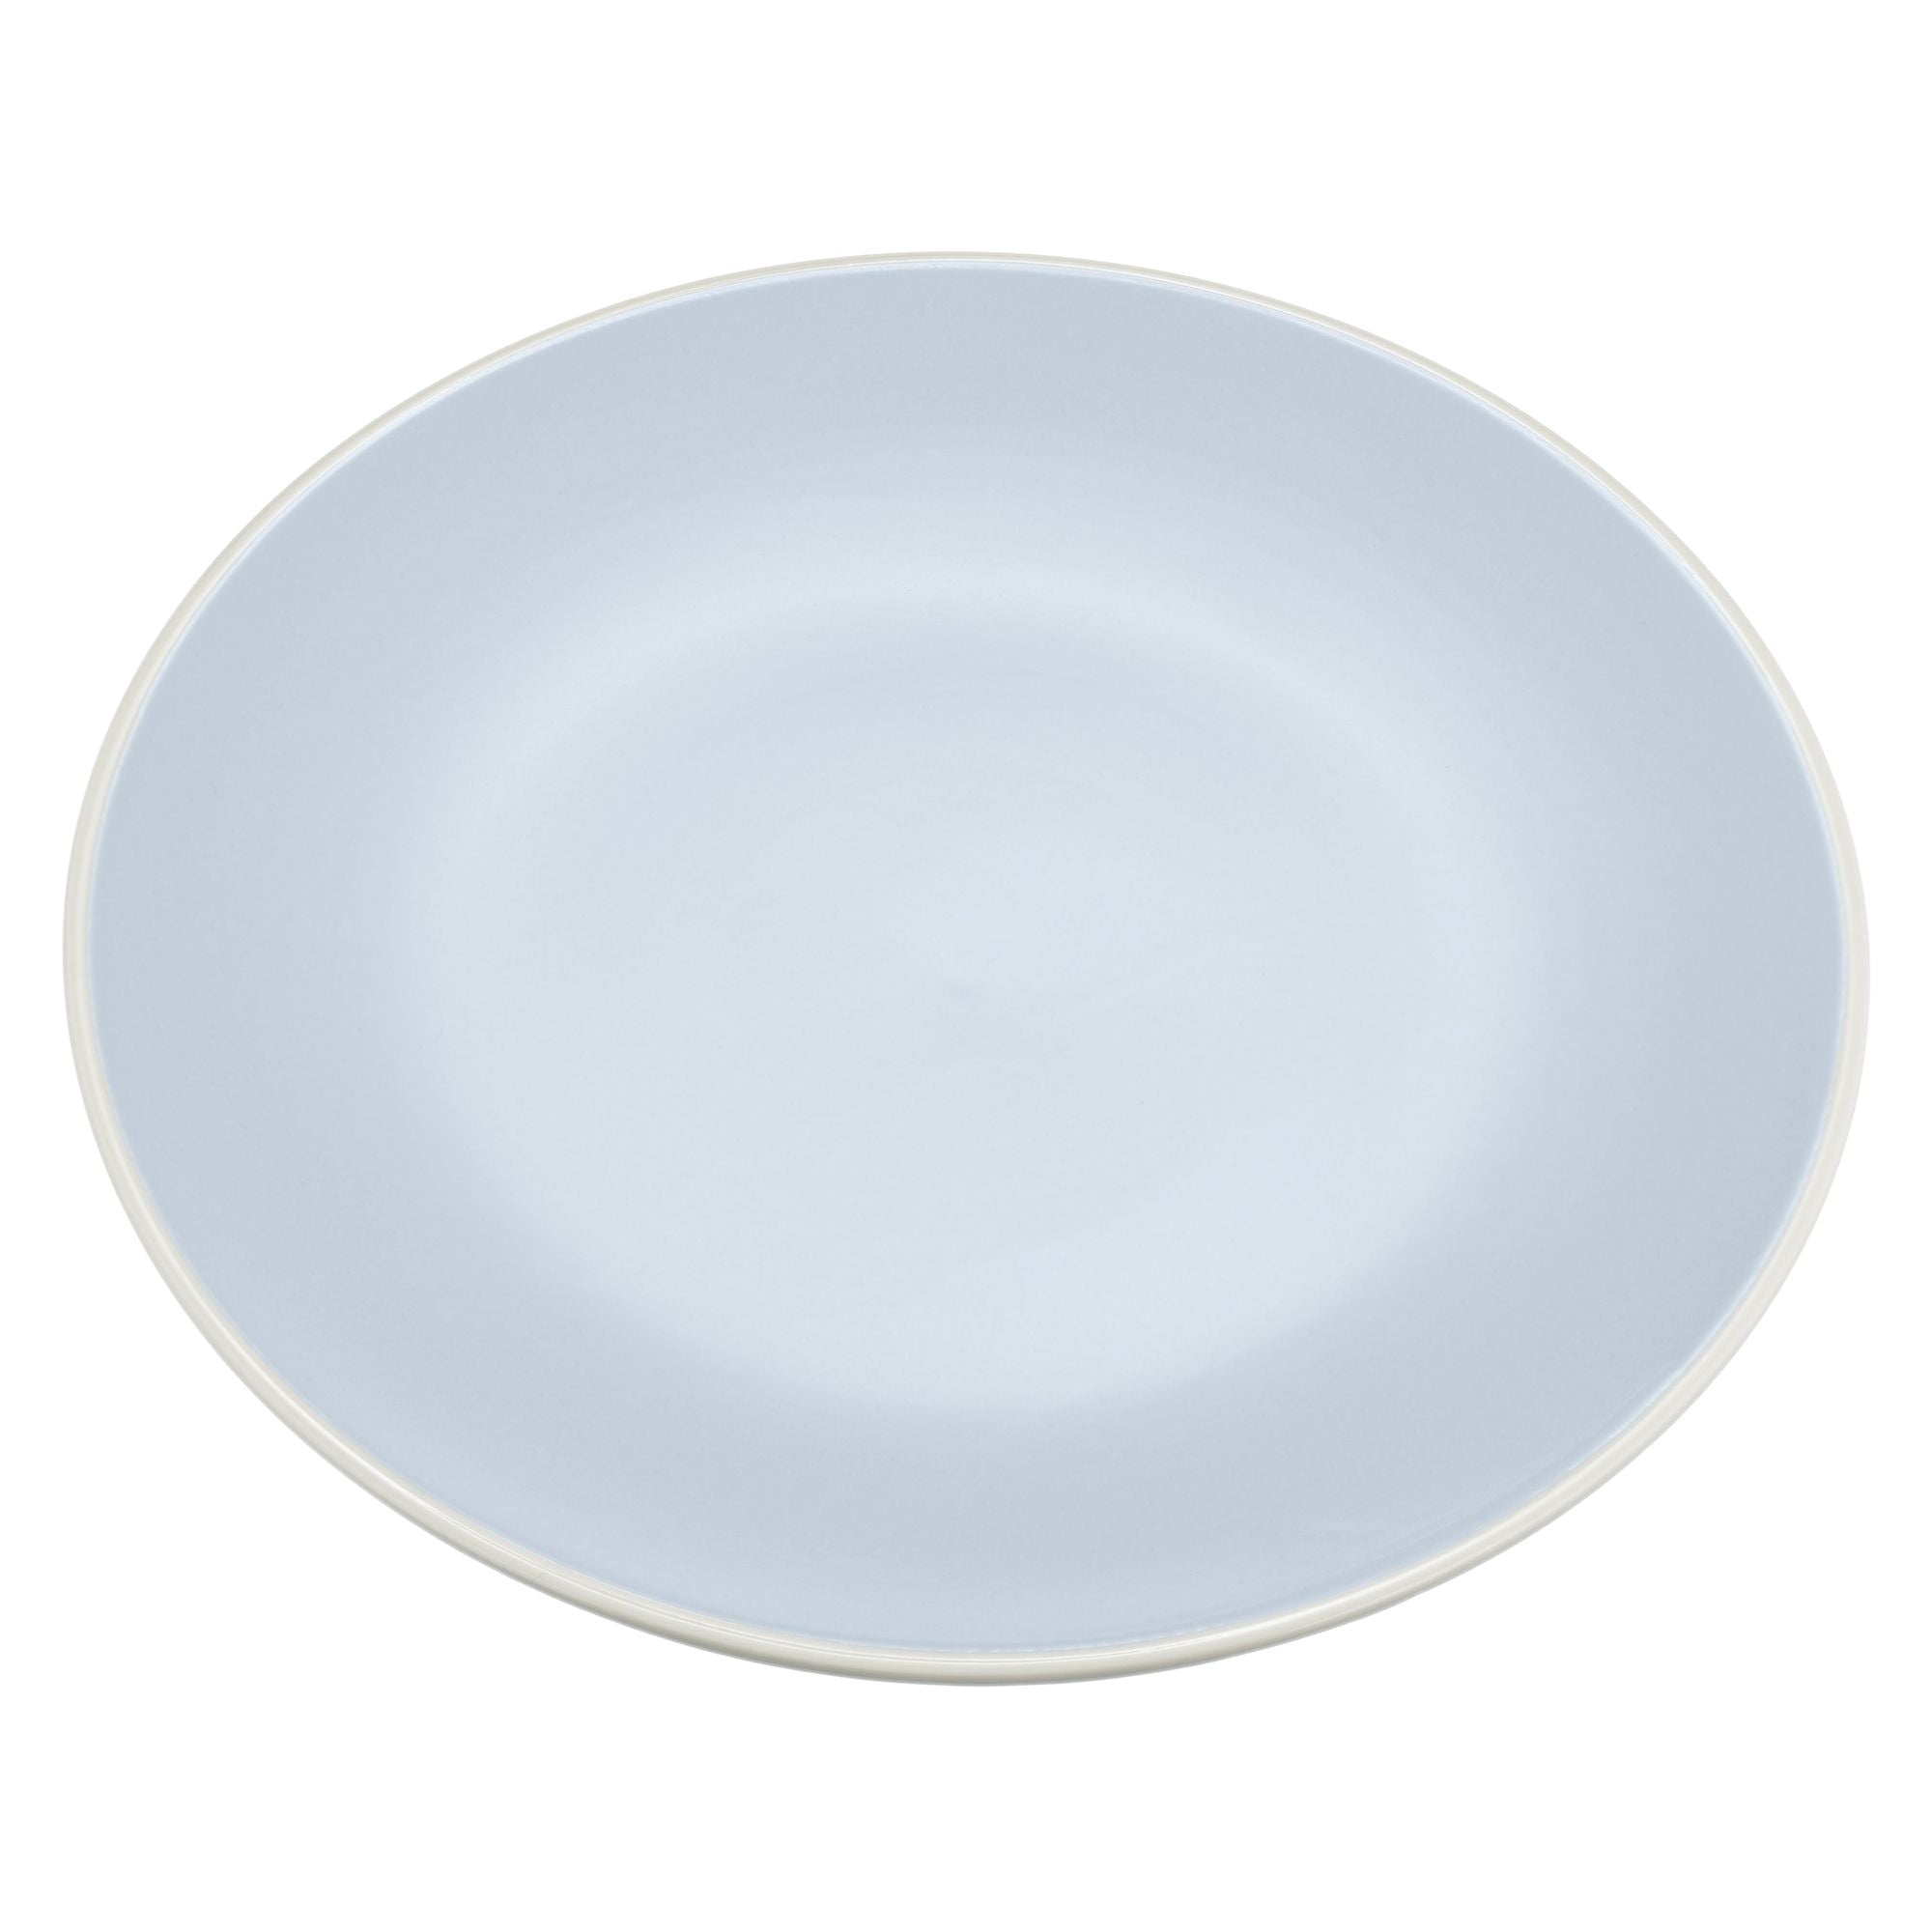 Blue Dinner Plate from China Blue